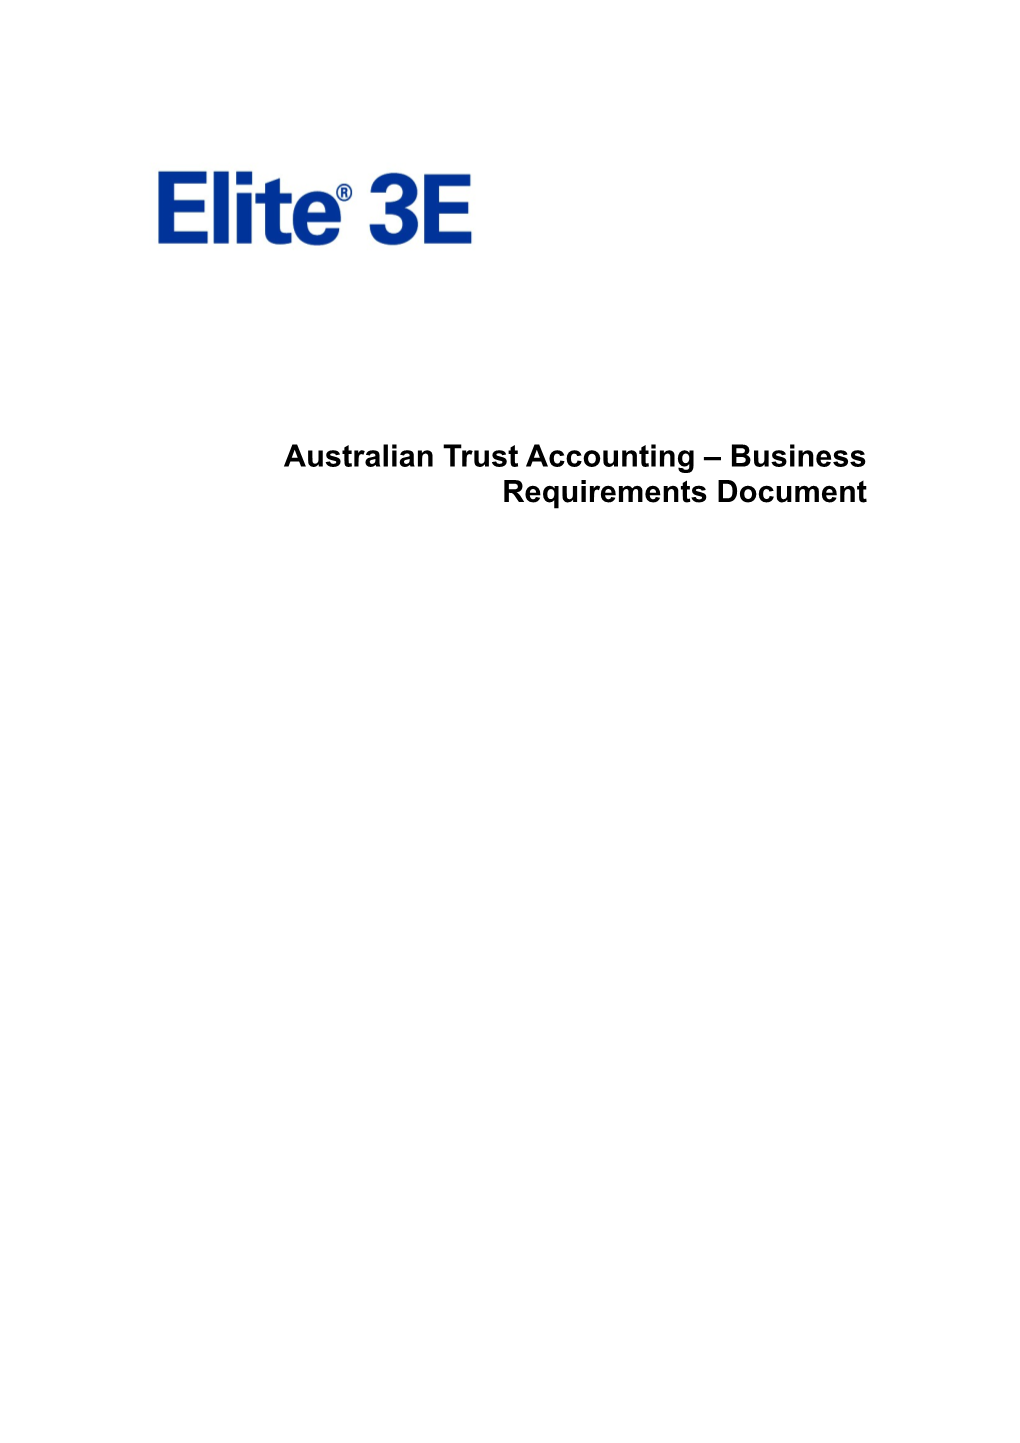 Australian Trust Accounting Business Requirements Document